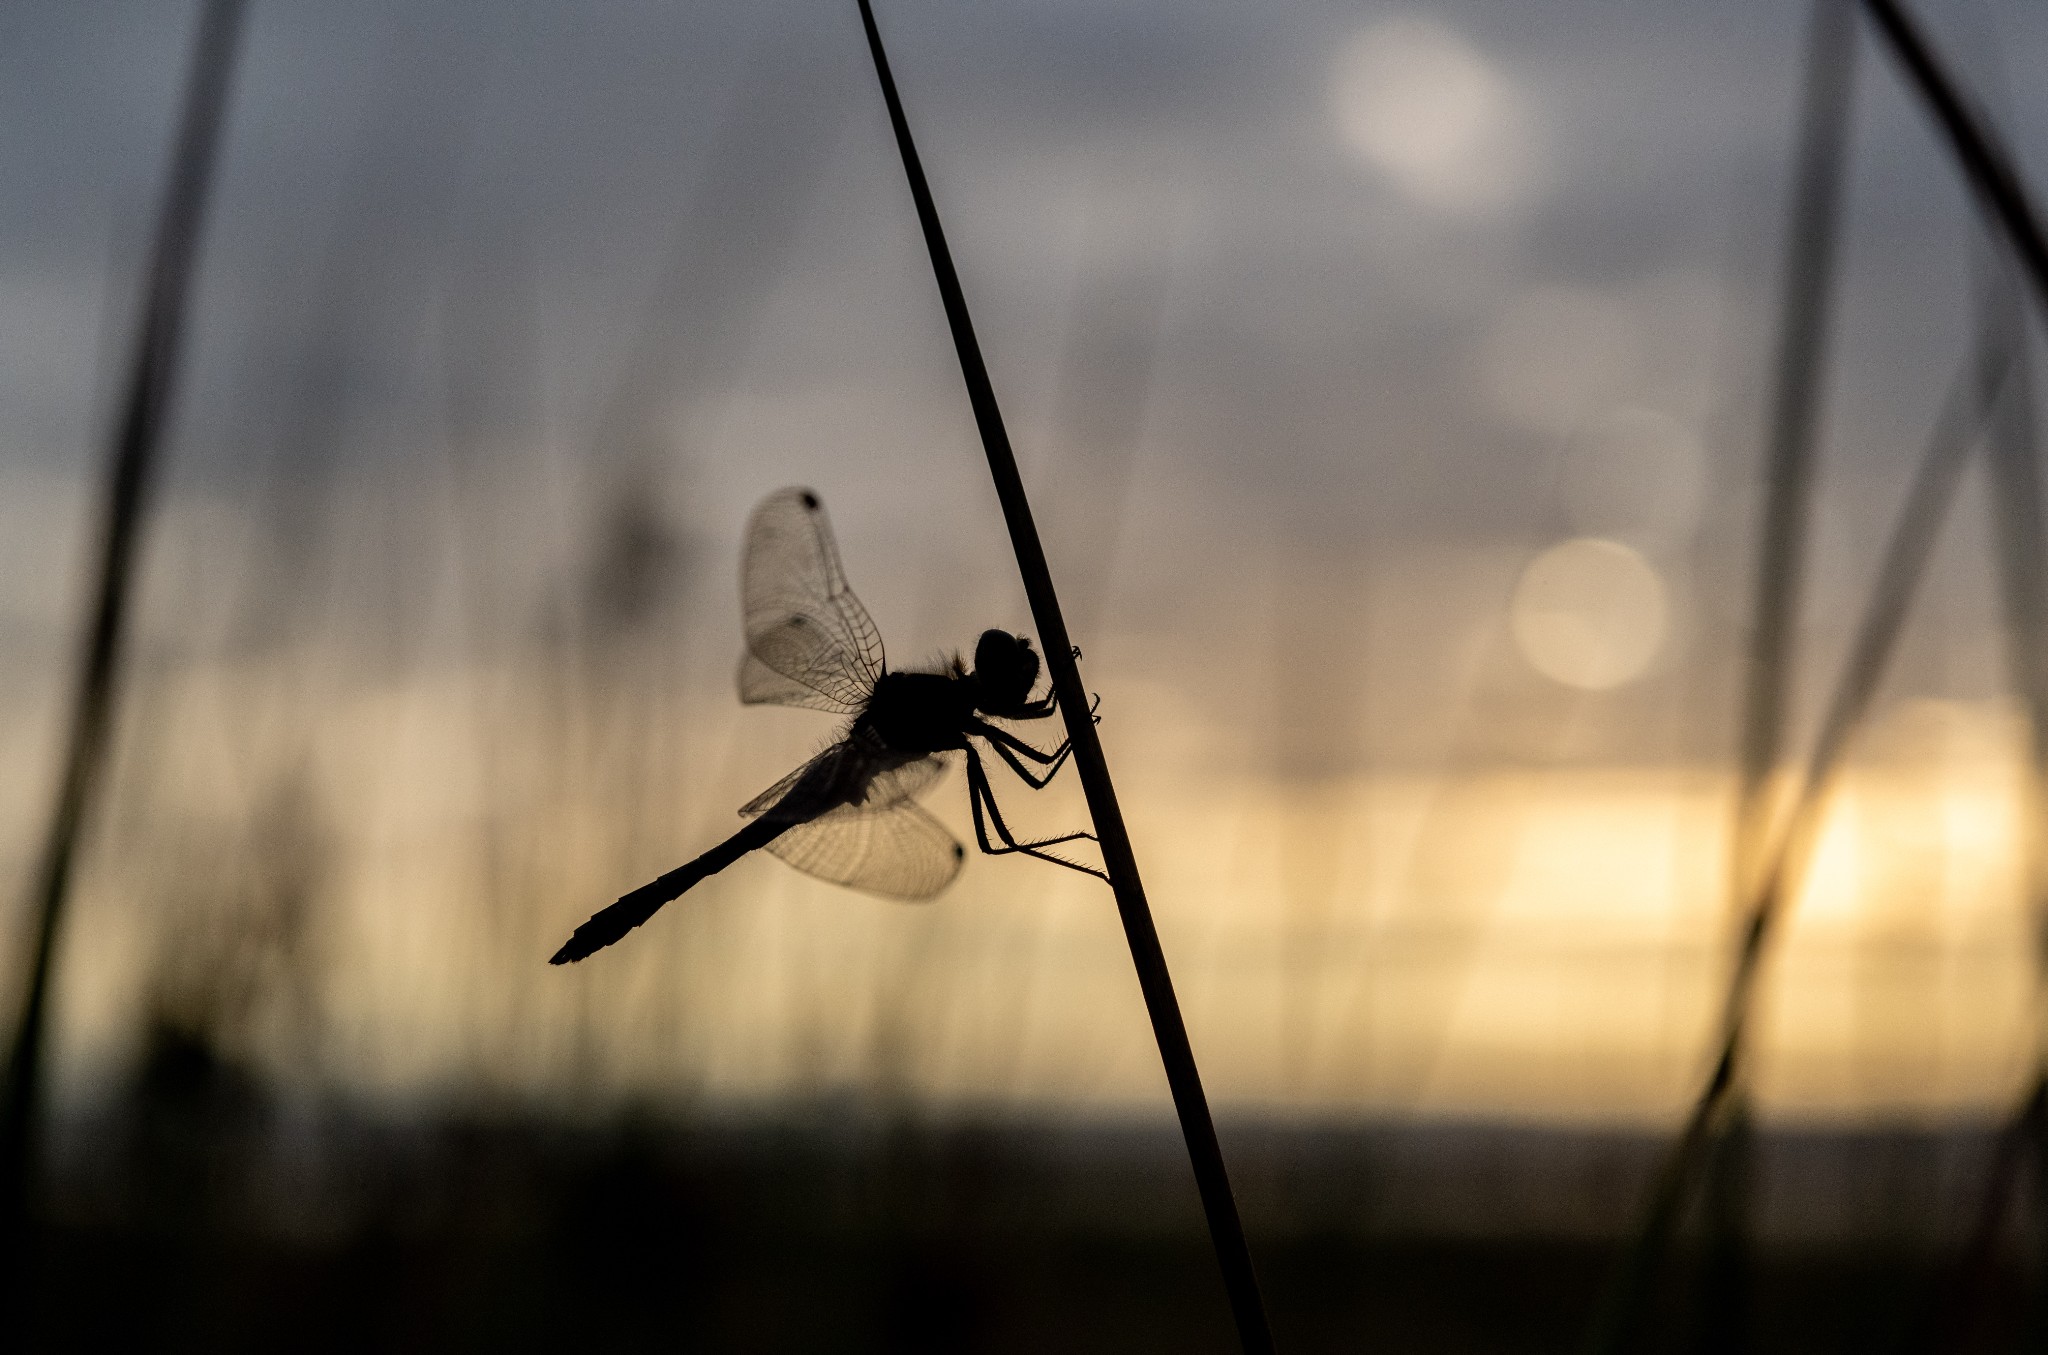 Black darter dragonfly in Hoy, Orkney - image by Raymond Besant